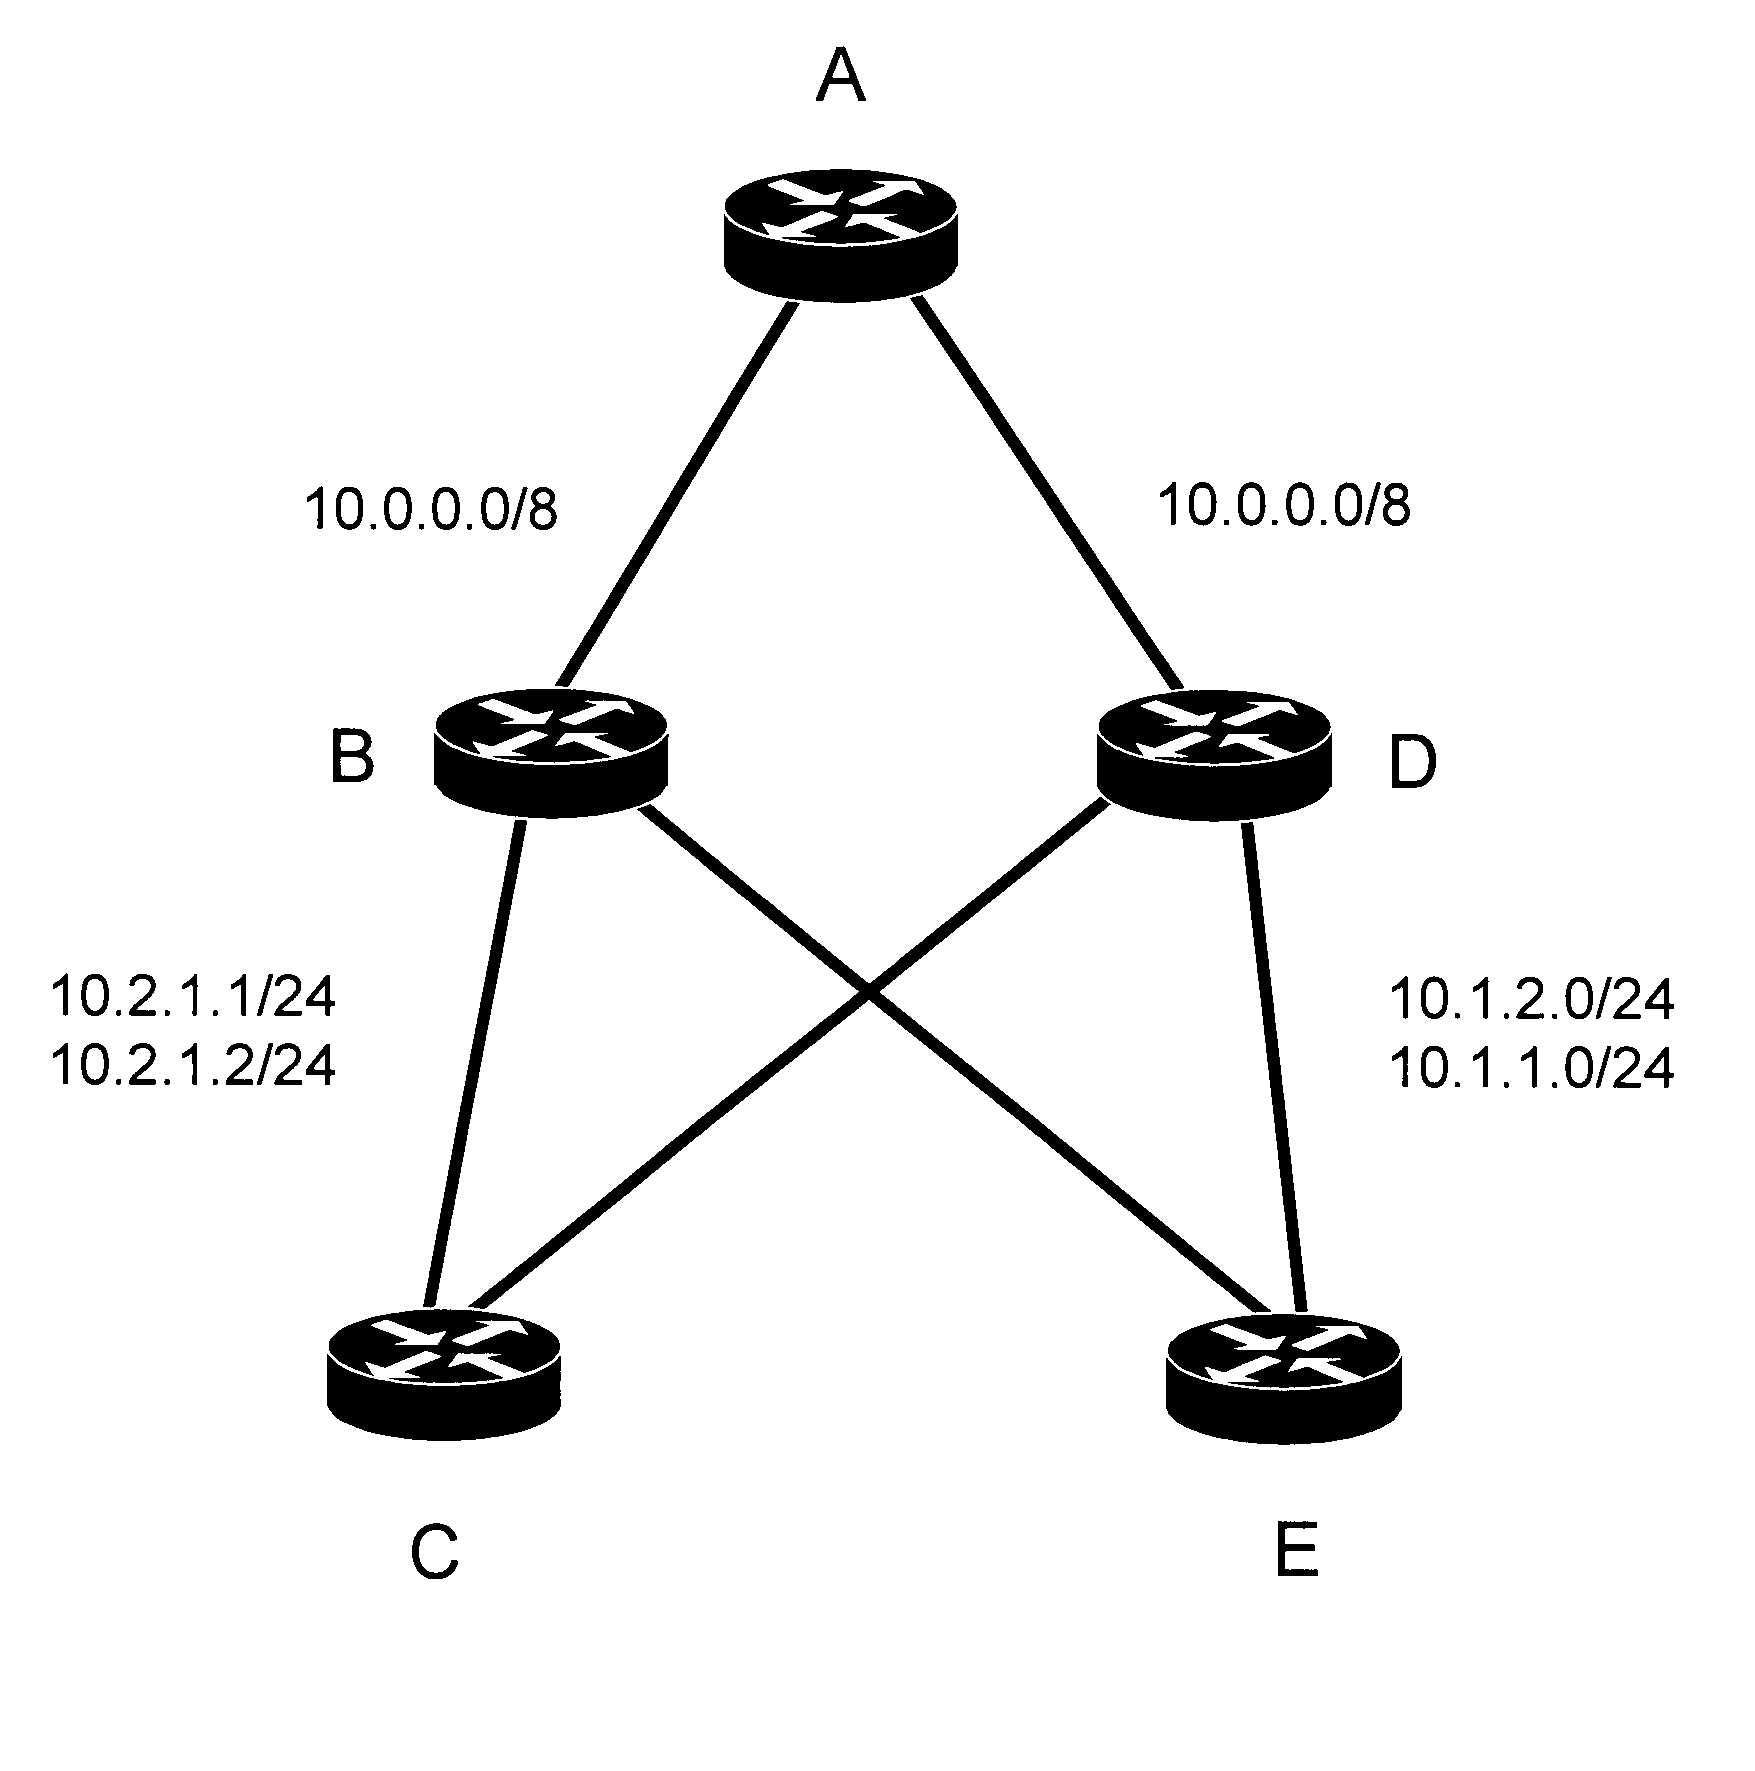 Technique to automatically deaggregate an optimum set to prevent suboptimal routing or routing failures within a link state flooding domain